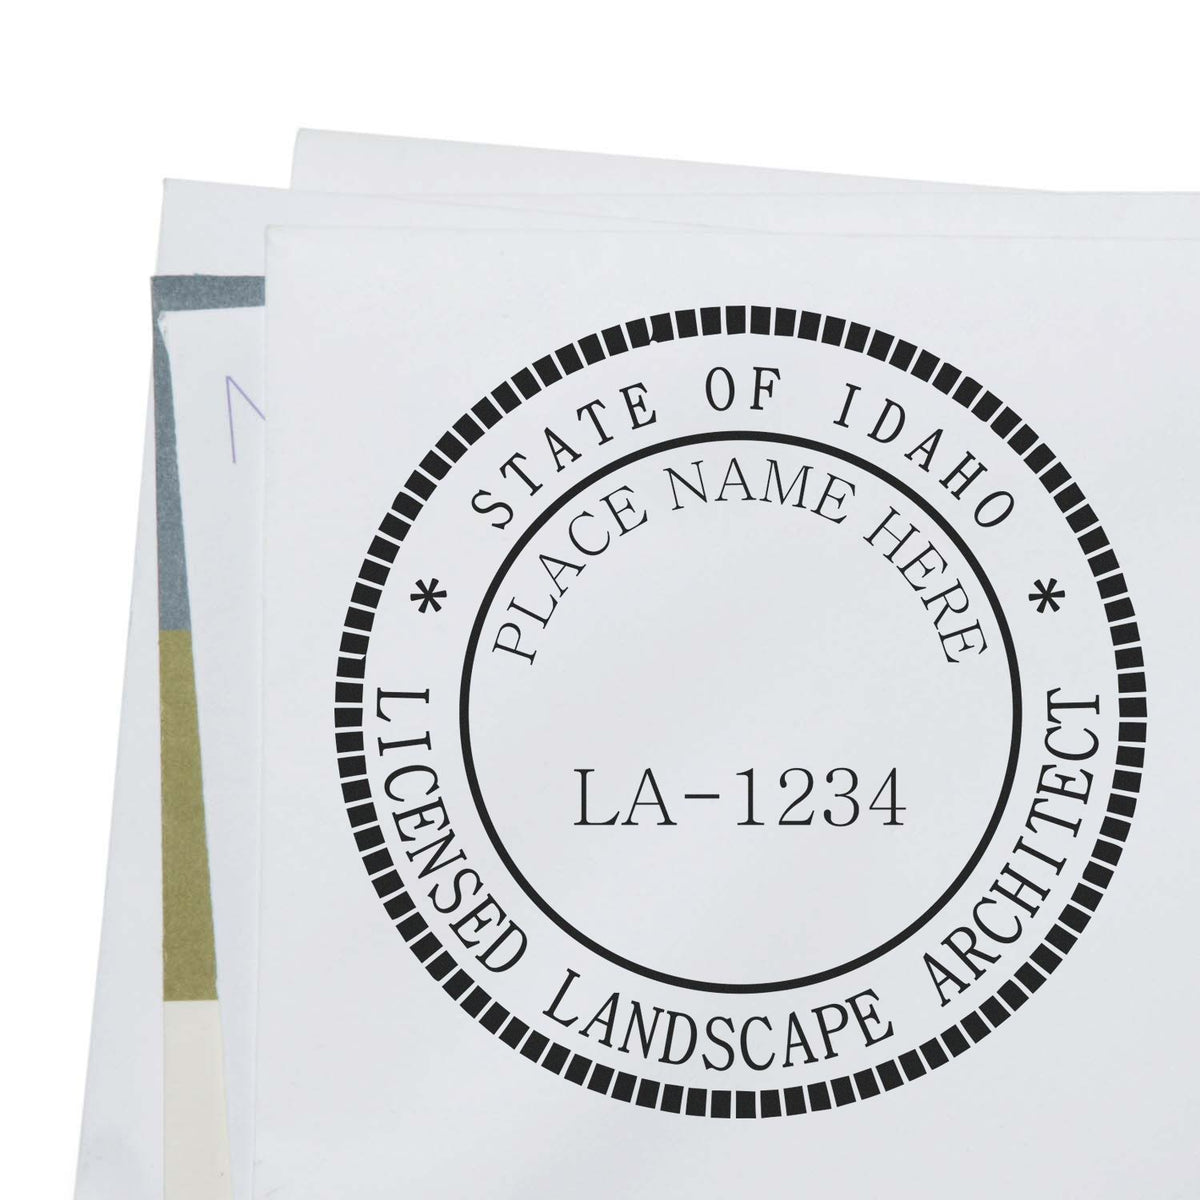 Slim Pre-Inked Idaho Landscape Architect Seal Stamp in use photo showing a stamped imprint of the Slim Pre-Inked Idaho Landscape Architect Seal Stamp